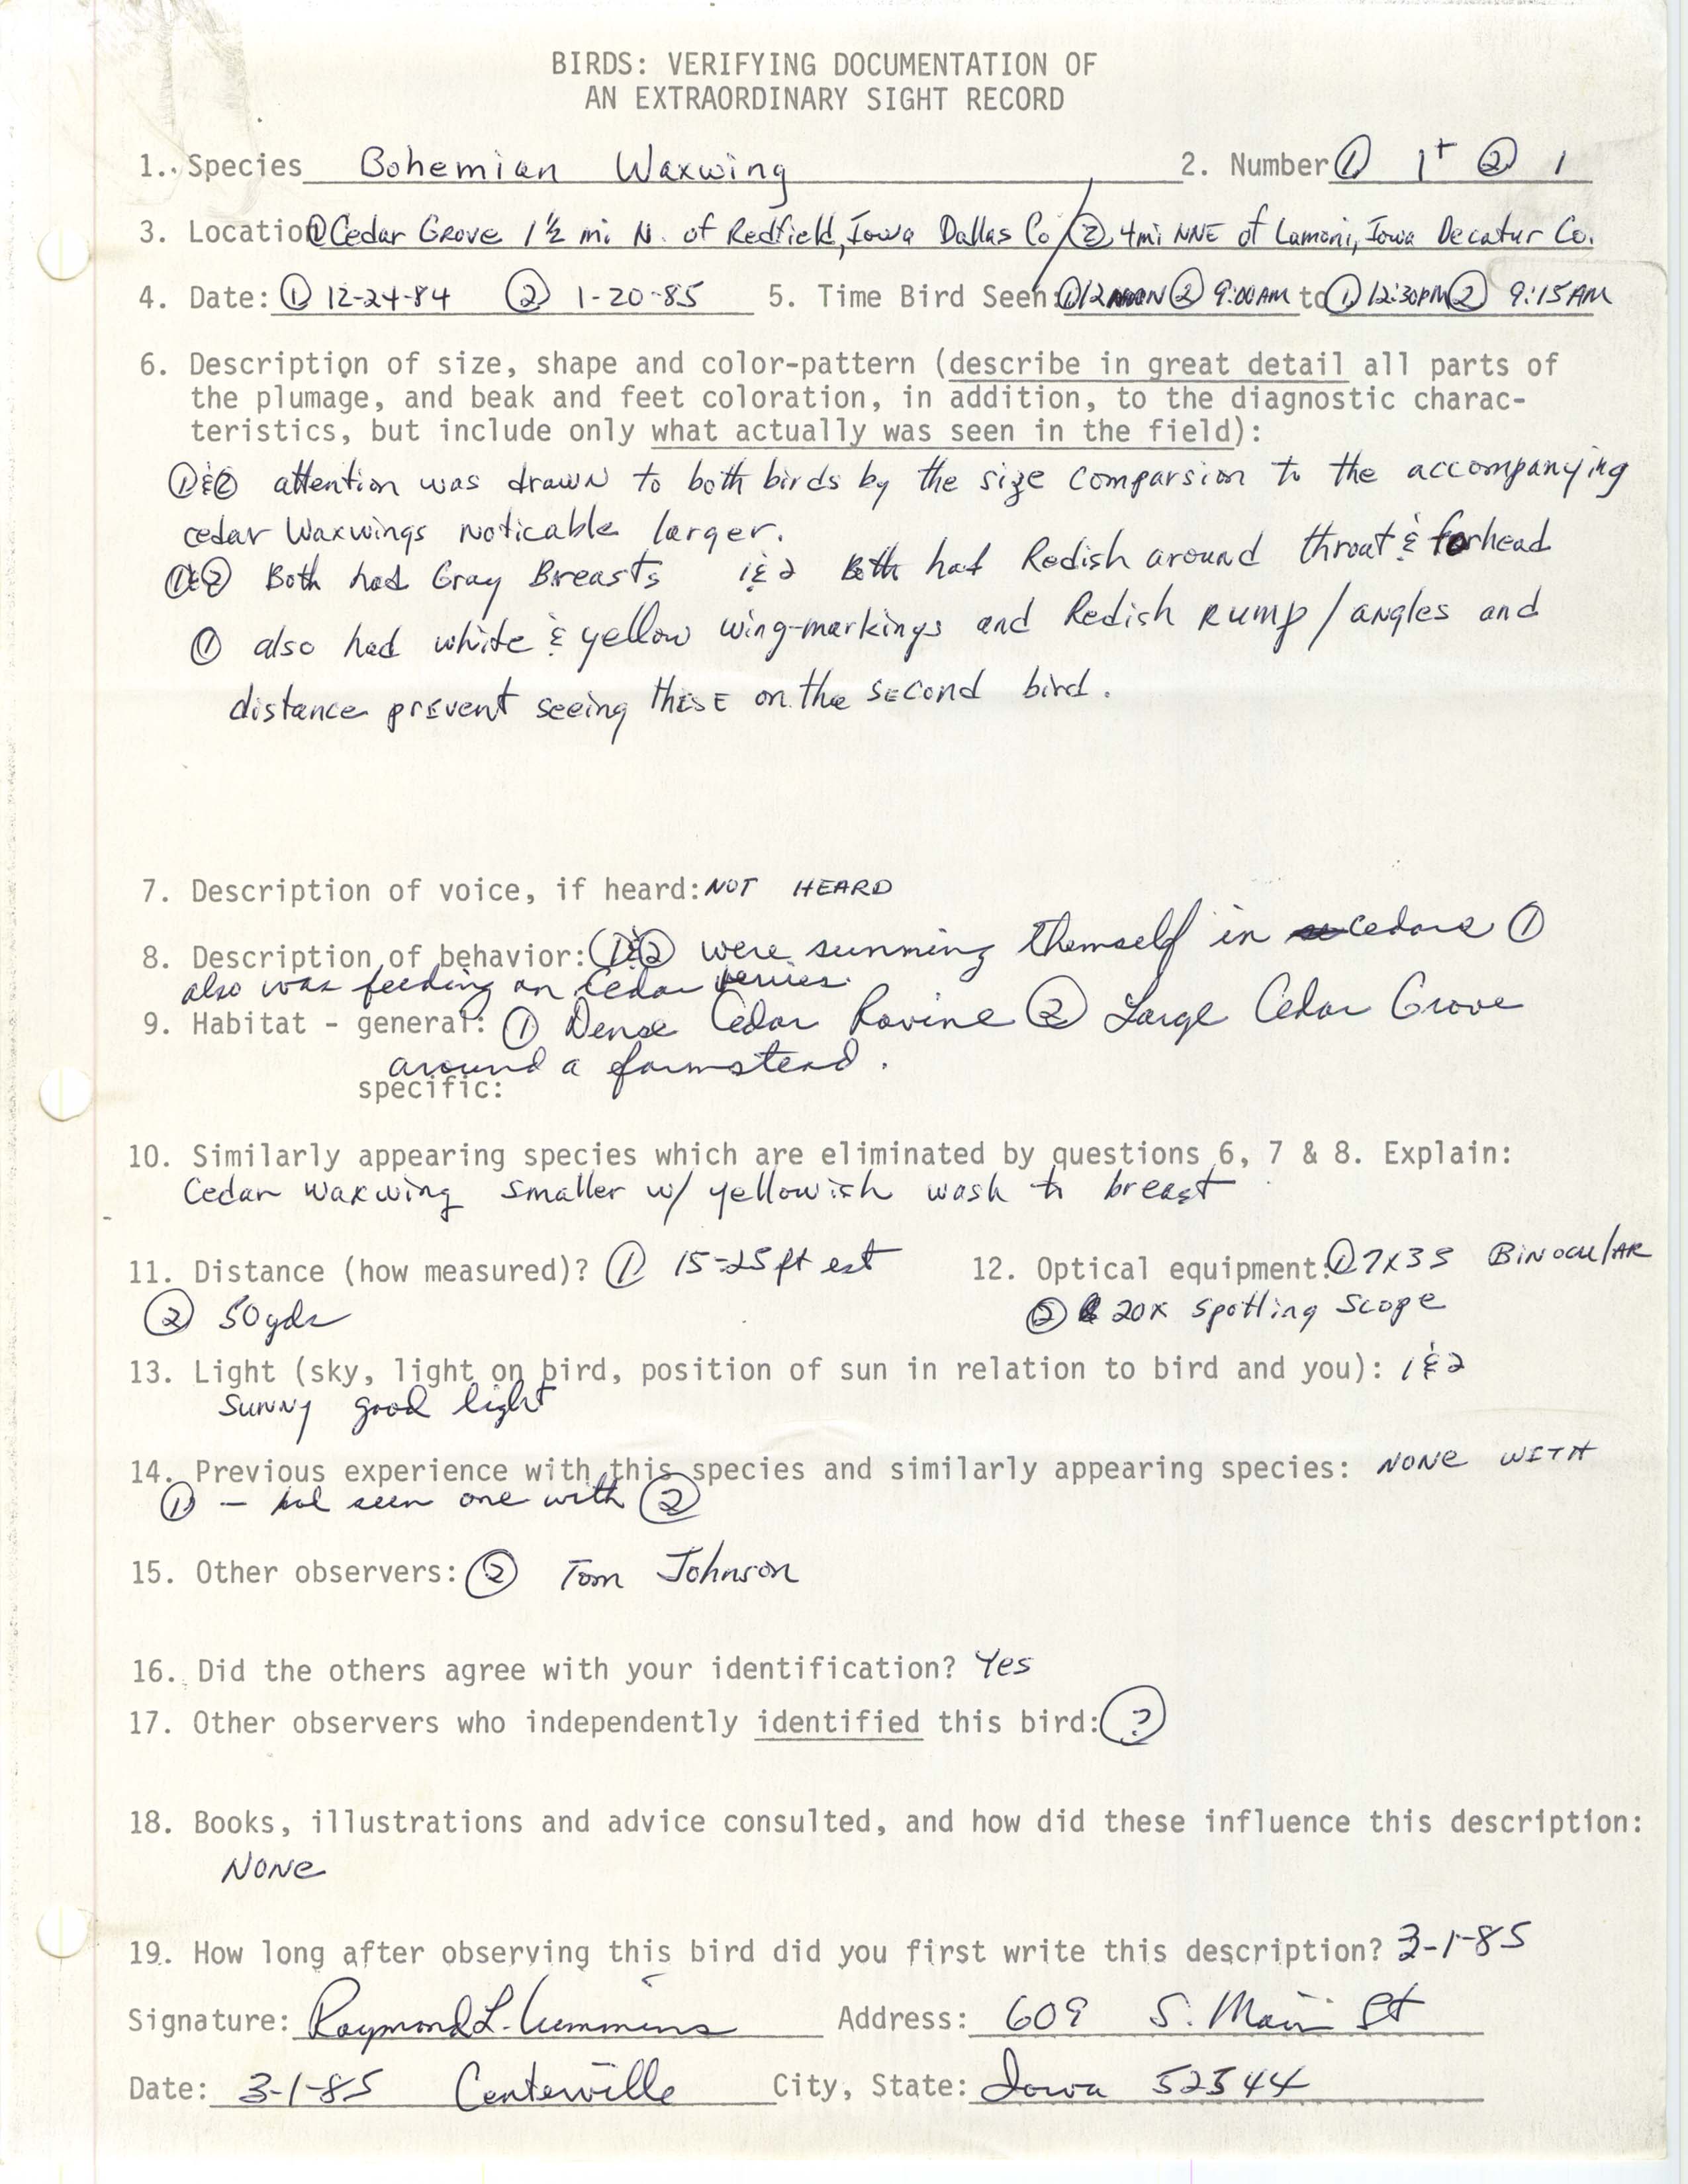 Rare bird documentation form for Bohemian Waxwing north of Redfield and north-northeast of Lamoni, 1984 and 1985